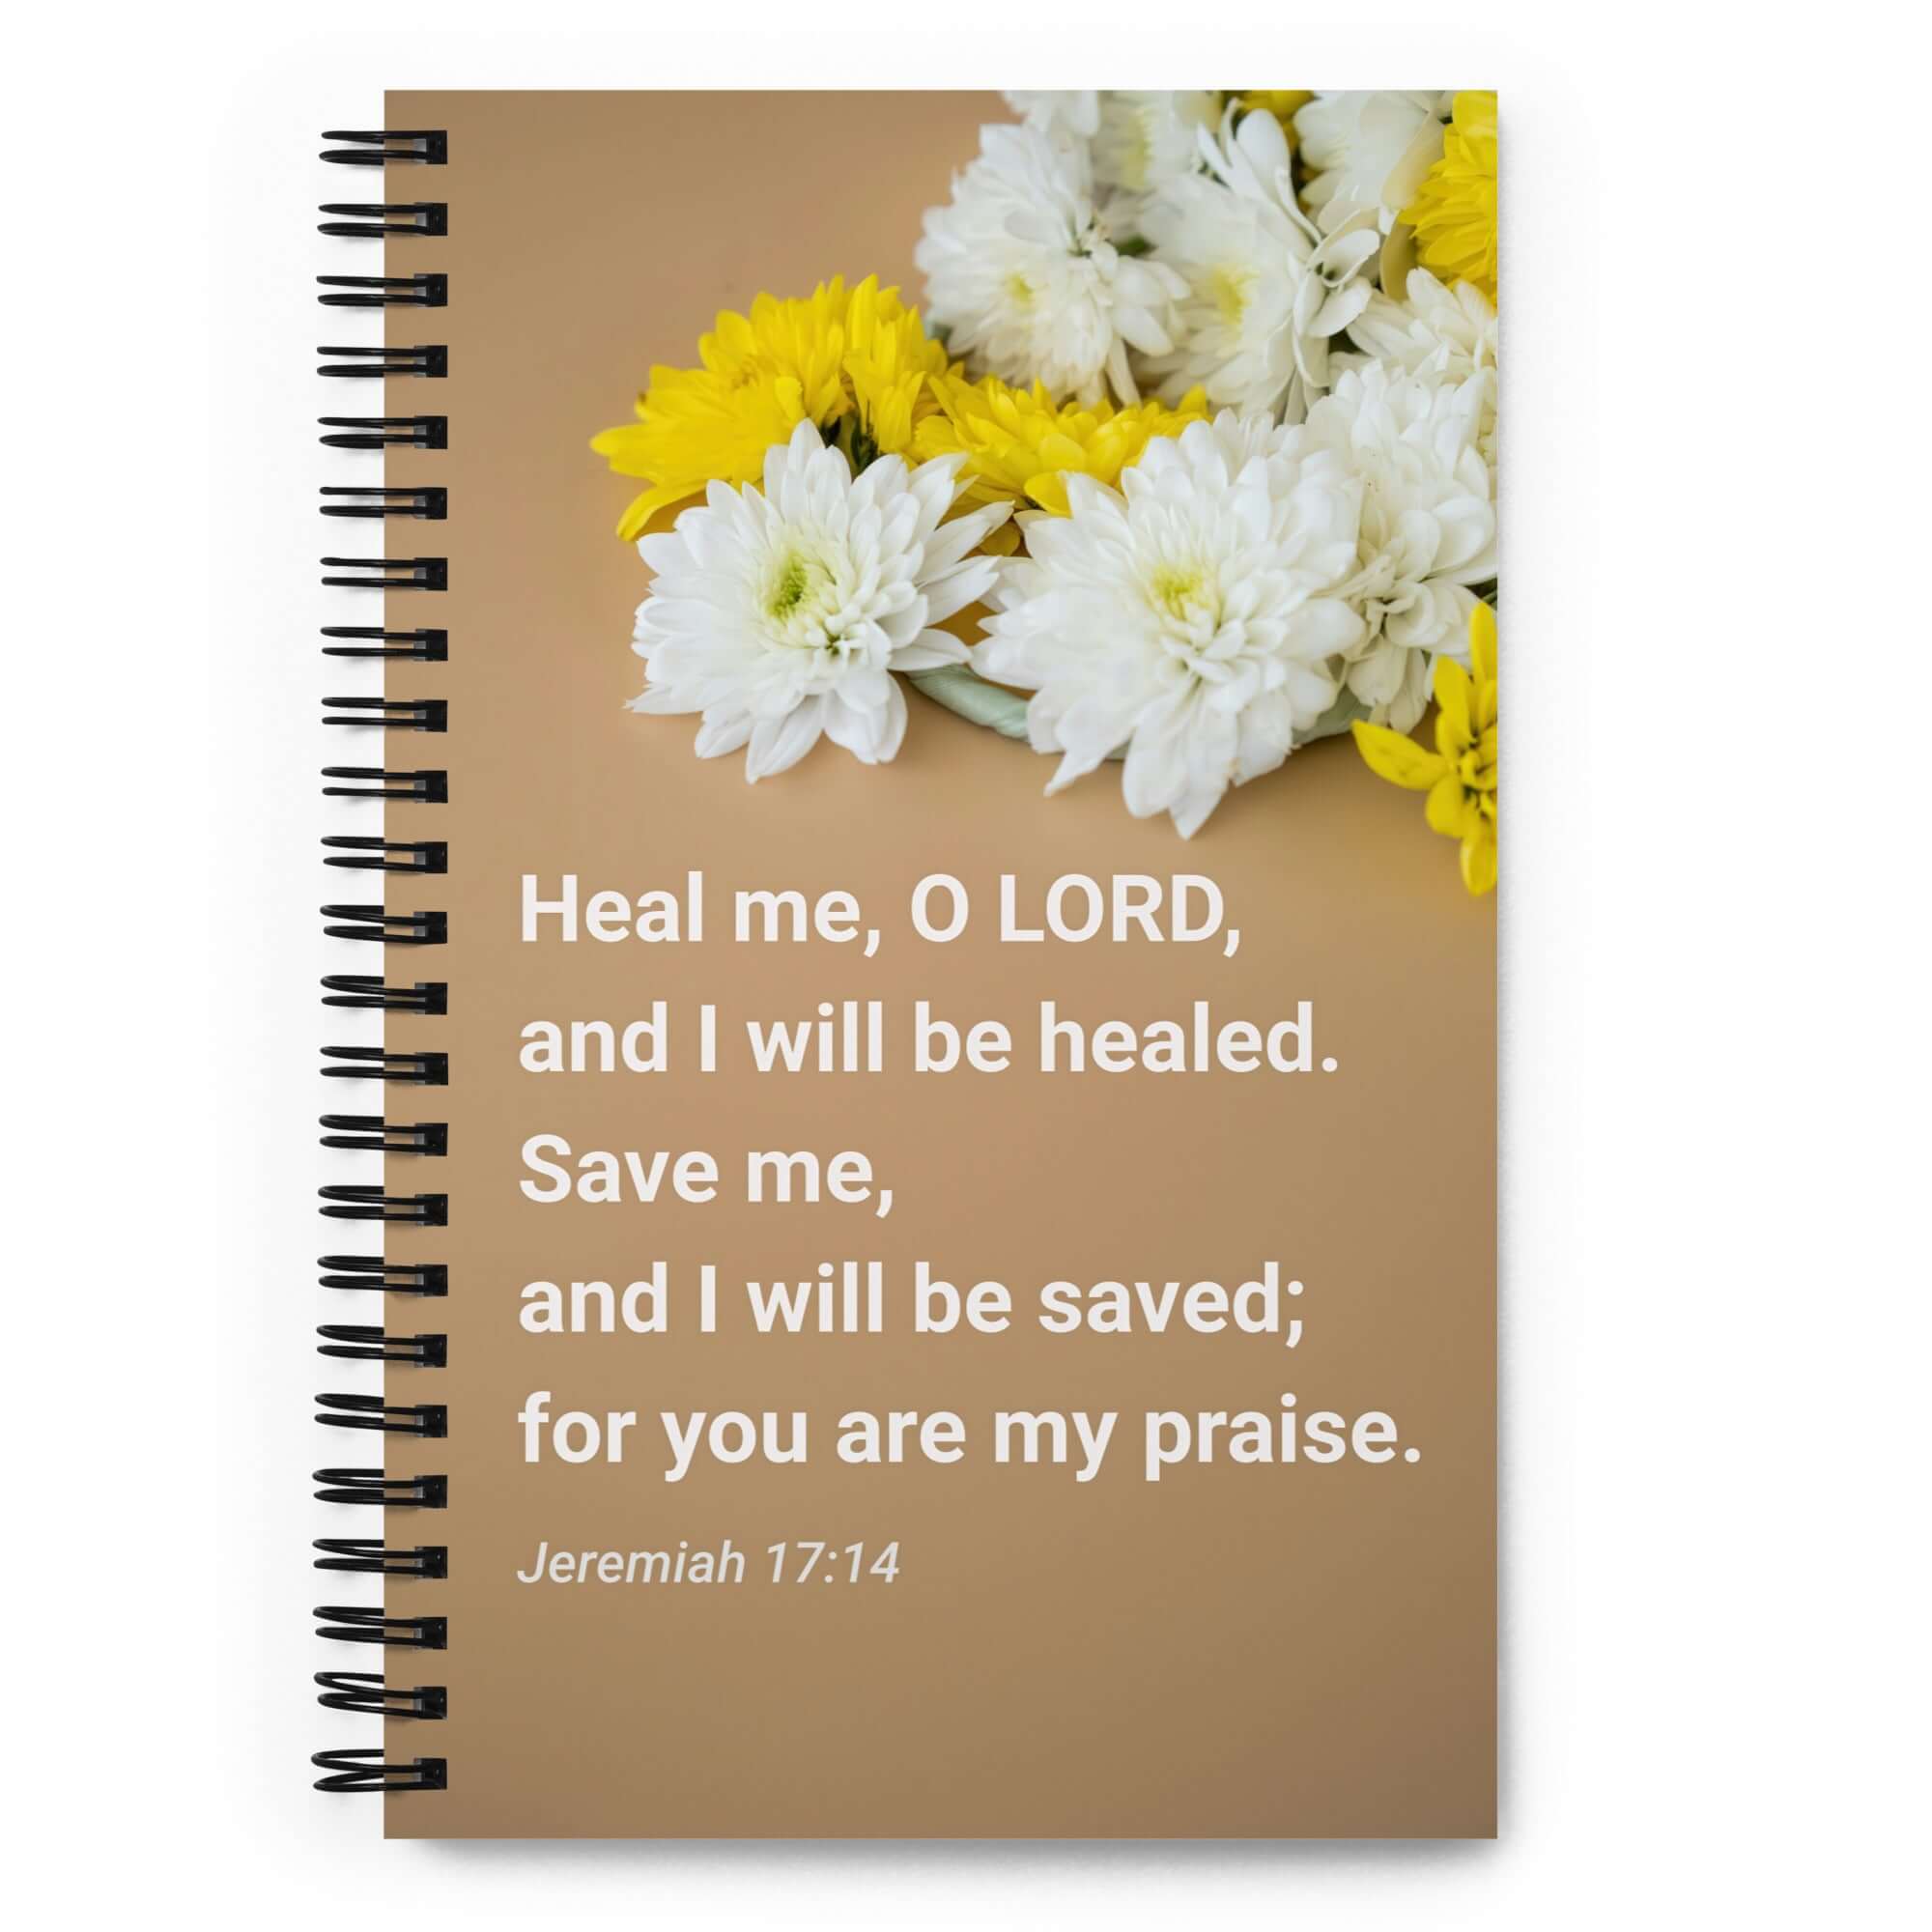 Jer 17:14 - Bible Verse, Heal me, O LORD Spiral Notebook